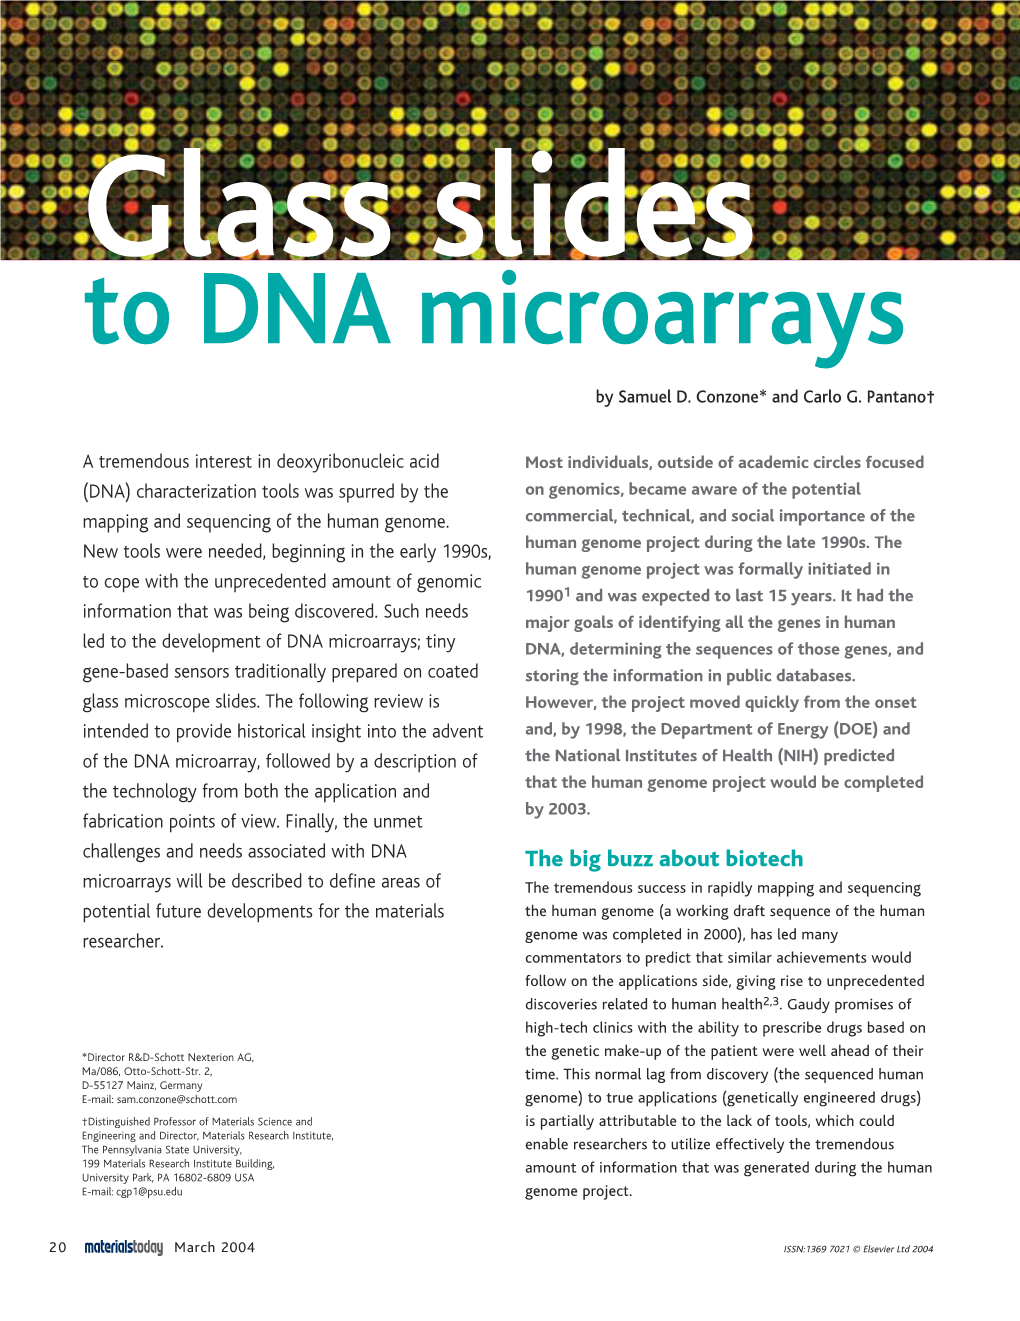 To DNA Microarrays